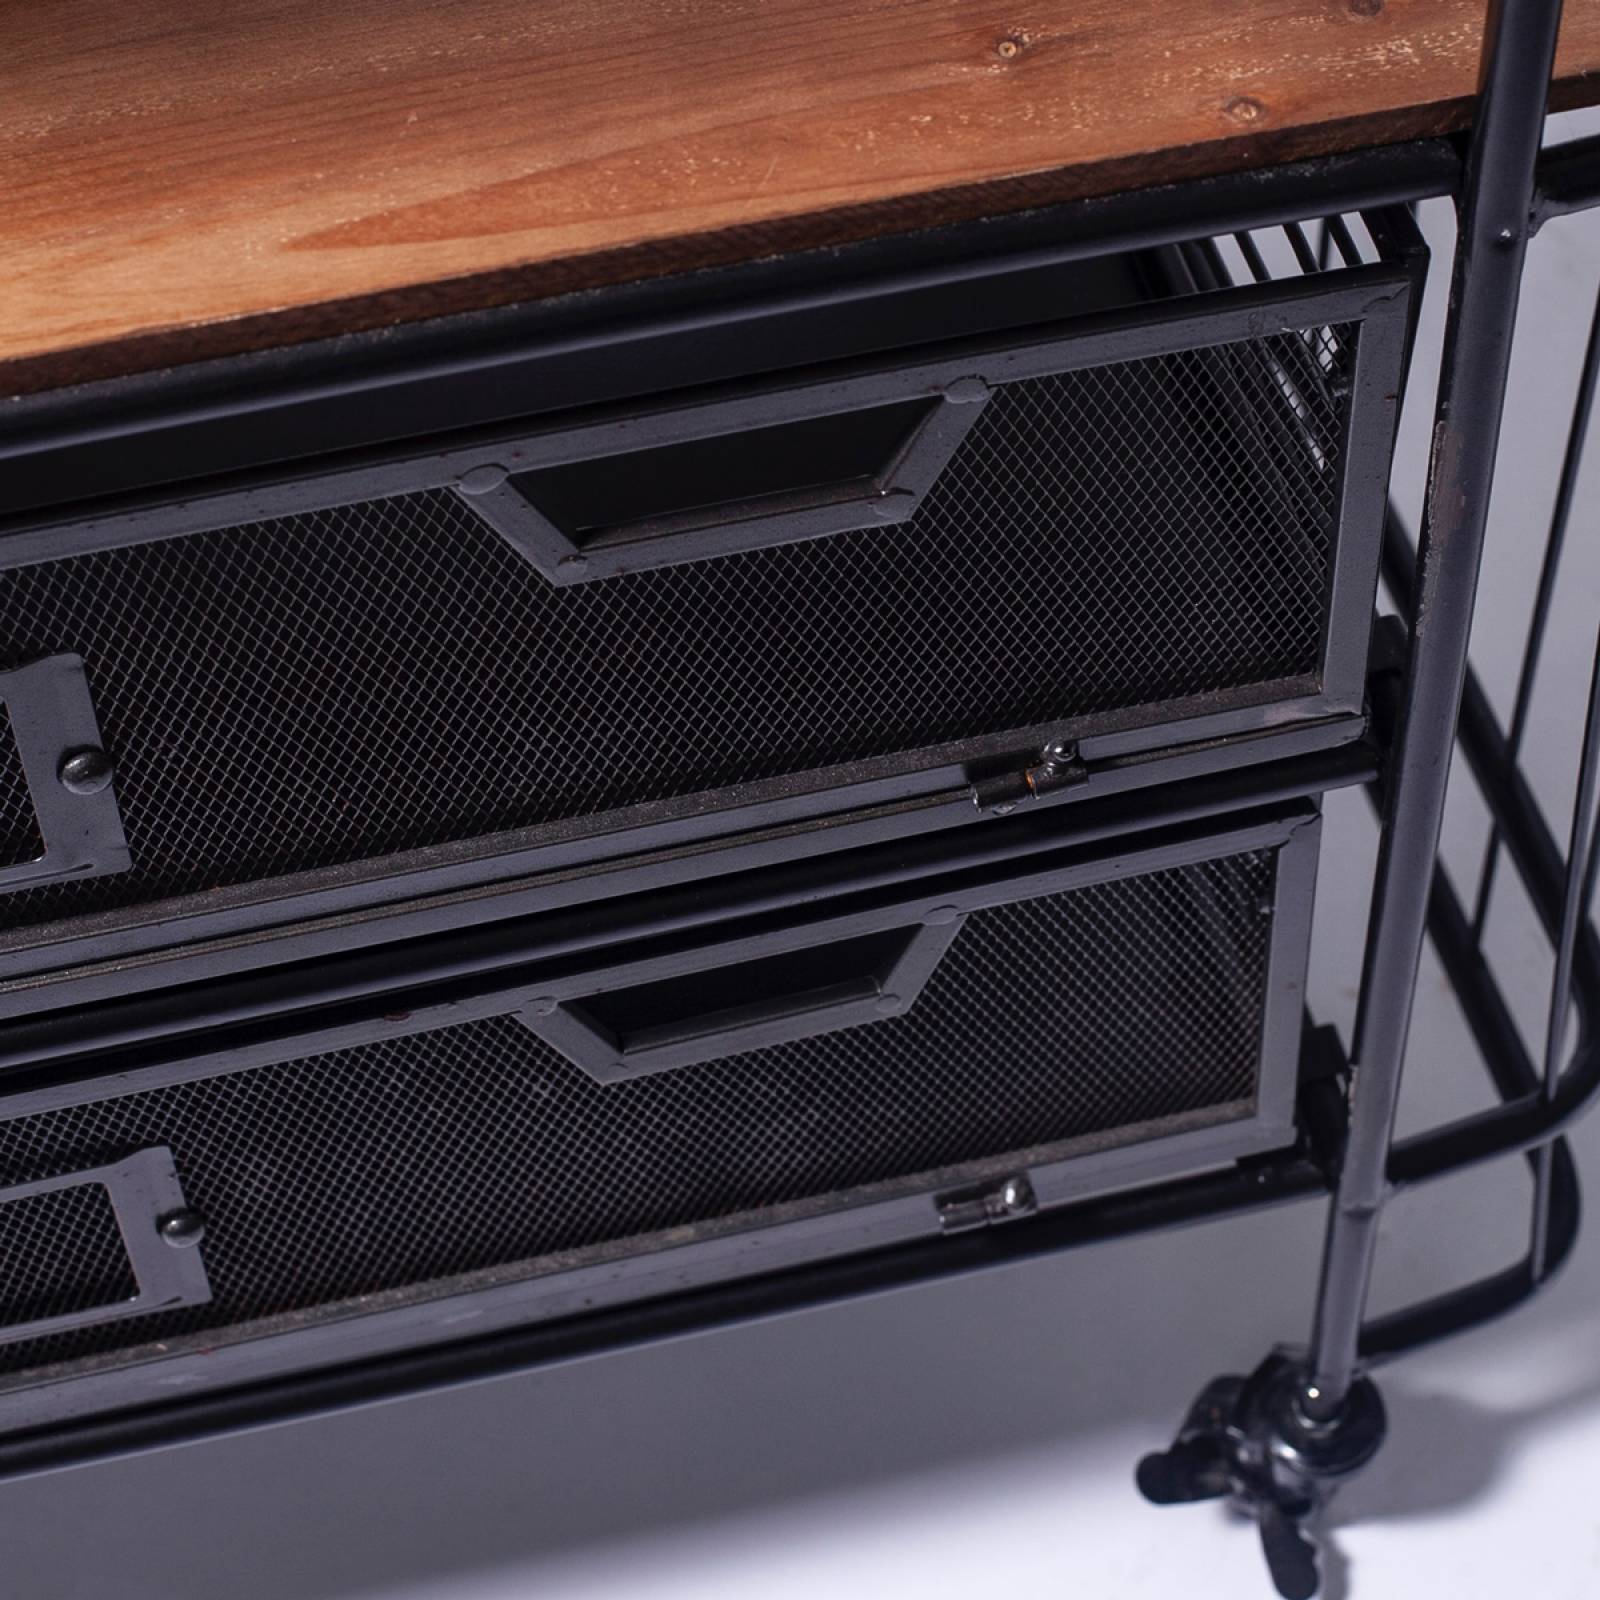 Wooden & Metal Shelving Unit With Drawers On Castors thumbnails